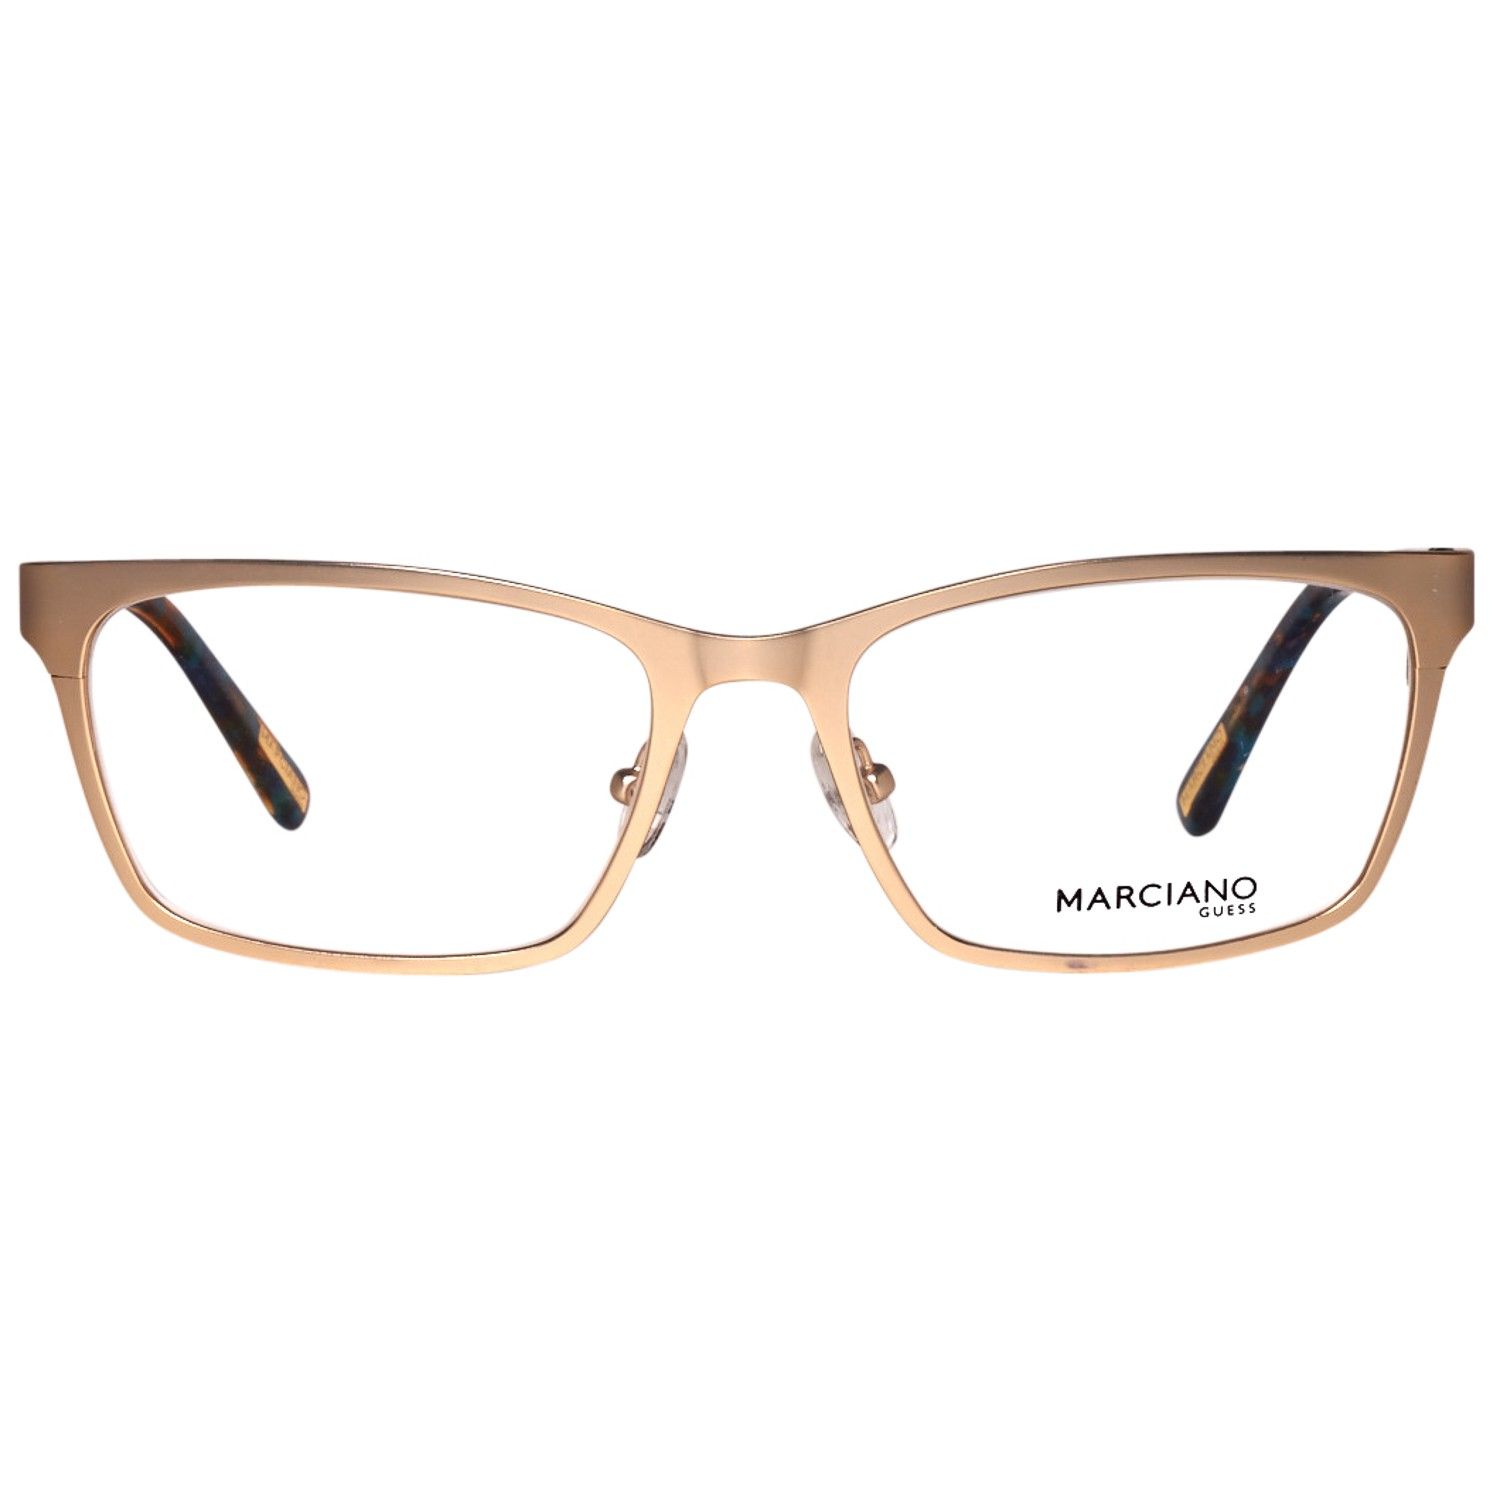 Guess By Marciano Optical Frame GM0271 032 54
Frame color: Gold
Lenses width: 54
Lenses heigth: 35
Bridge length: 17
Frame width: 140
Temple length: 135
Shipment includes: Case, Cleaning cloth
Style: Full-Rim
Women: Women